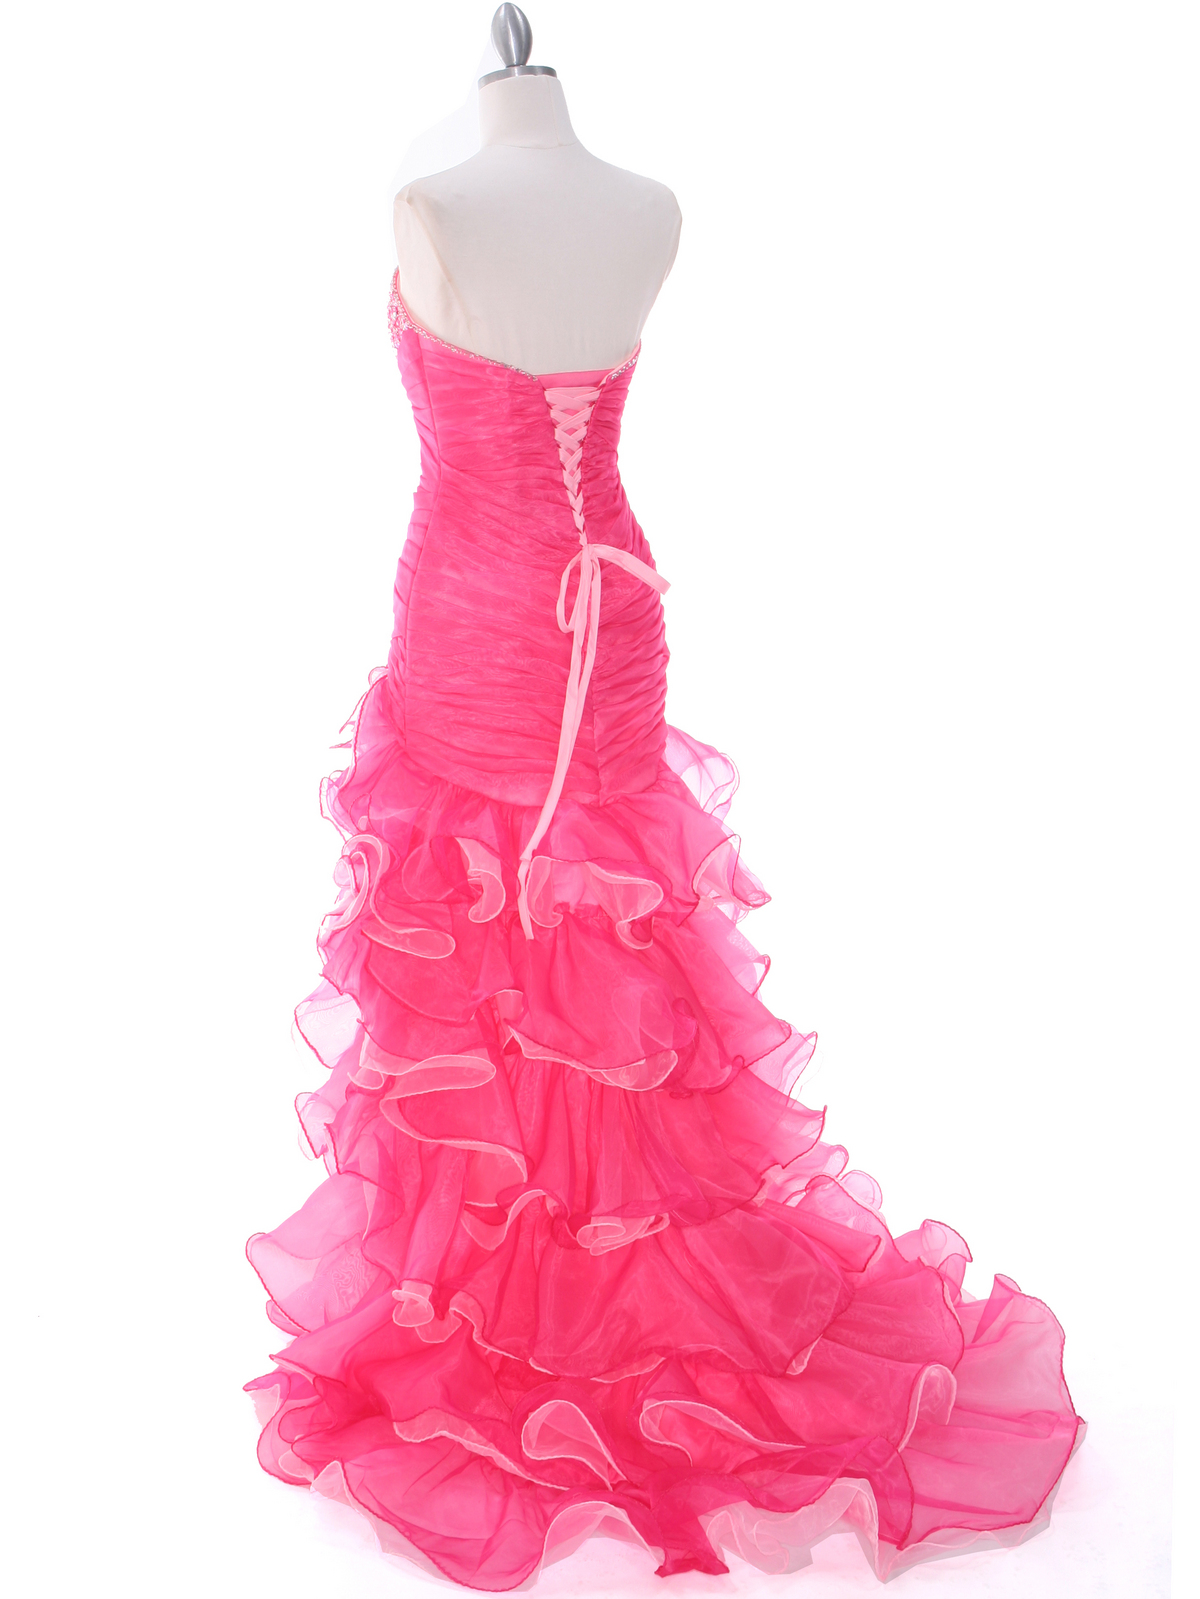 Hot Pink Prom Dress | Sung Boutique L.A.